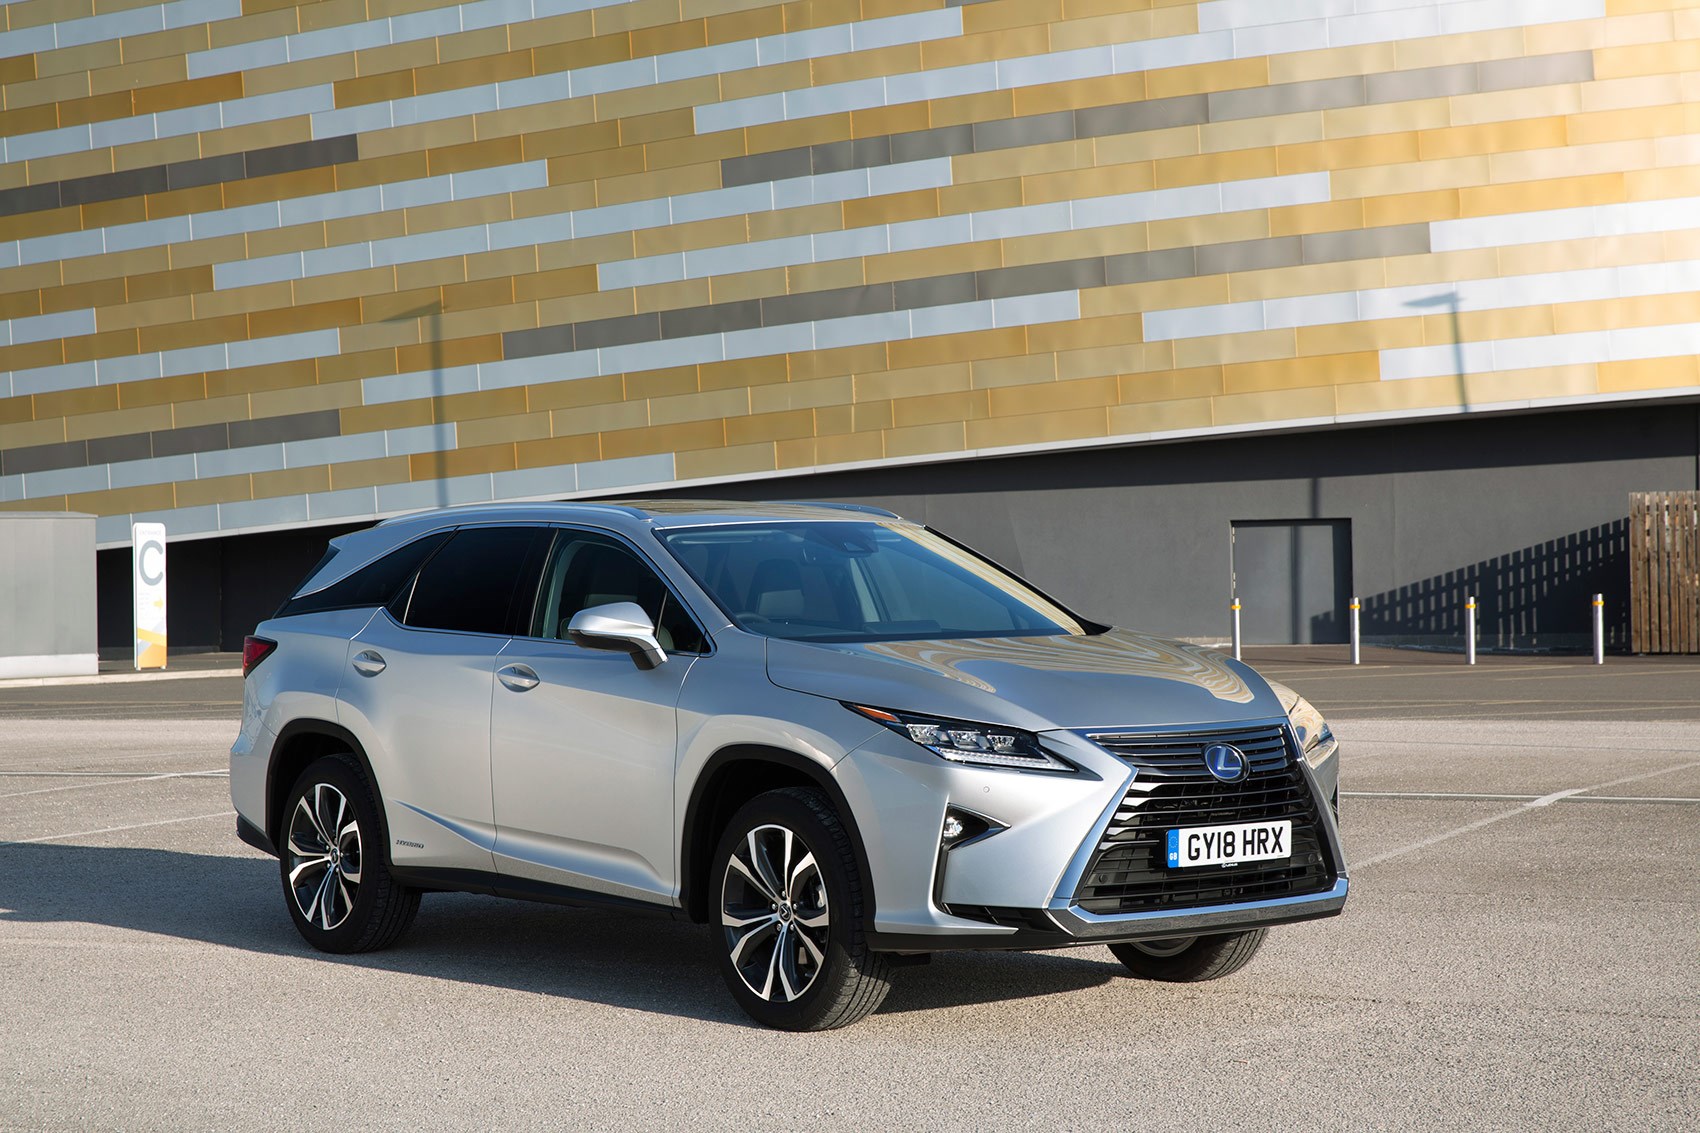 Lexus RX 450hL UK prices and specs: costs from £50,095 for the SE trim, £54,095 for Luxury and £61,995 for the Premier spec